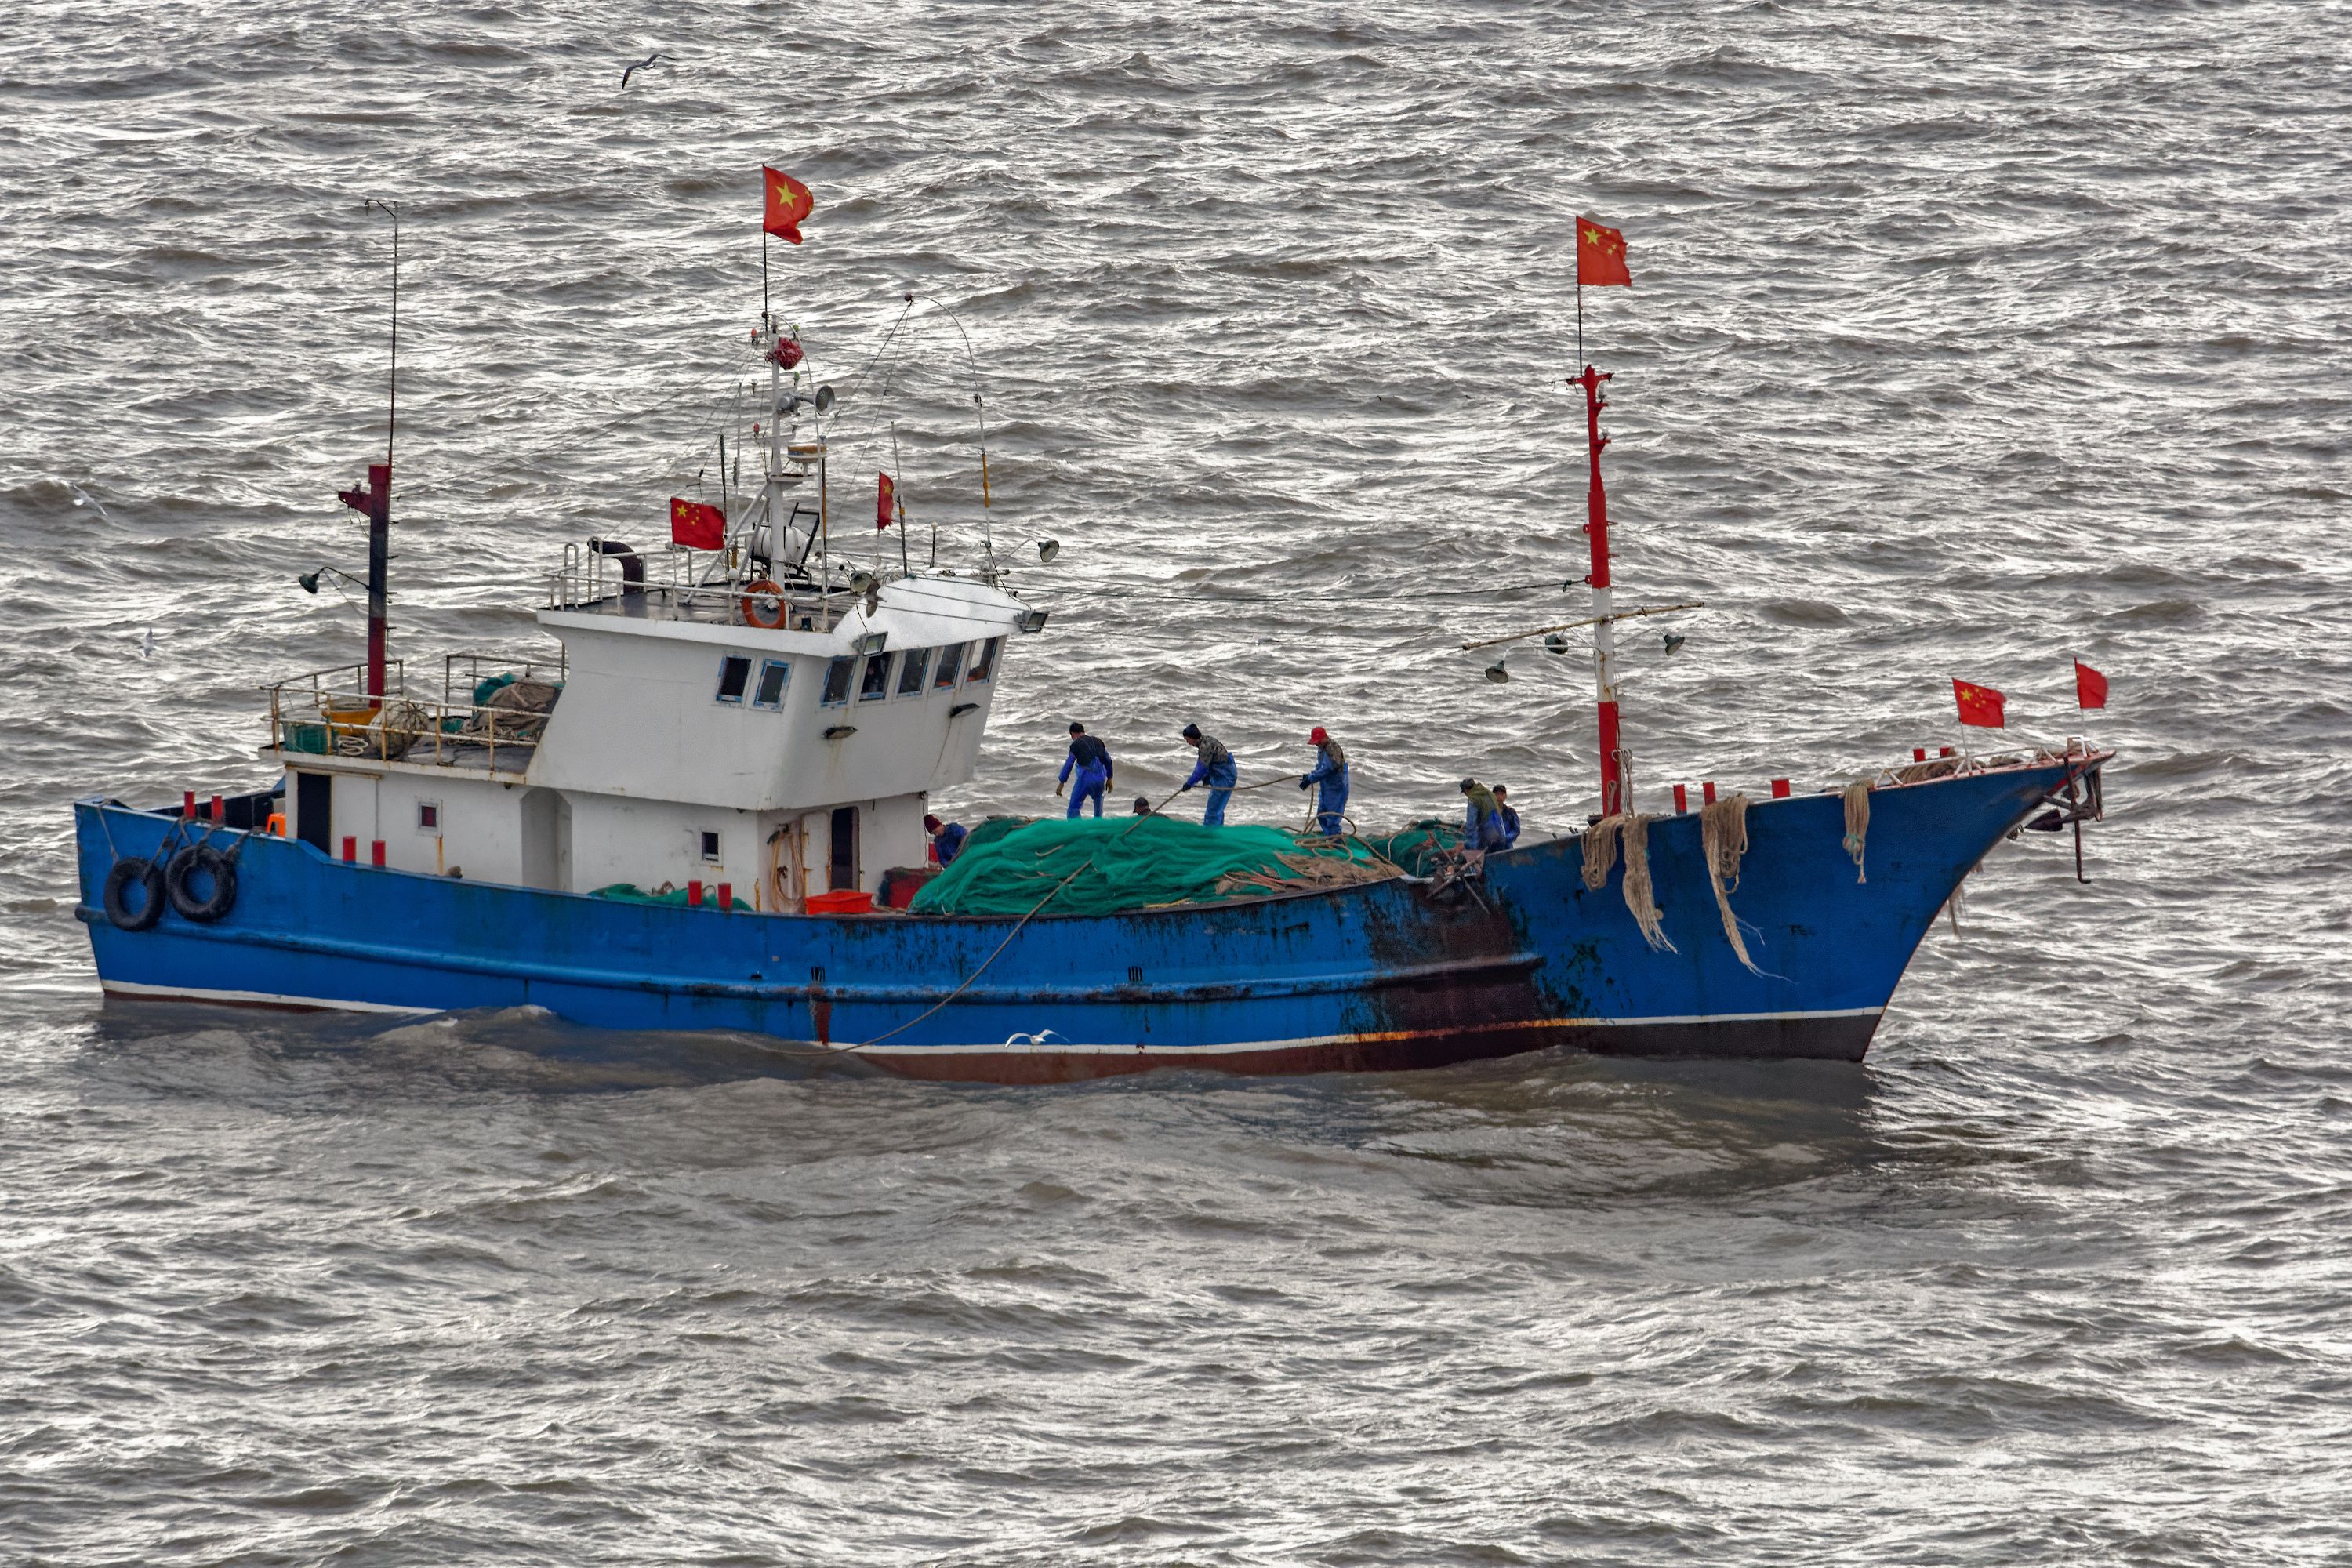 A commercial fishing boat on the South China Sea. Image by Igor Grochev / Shutterstock. 